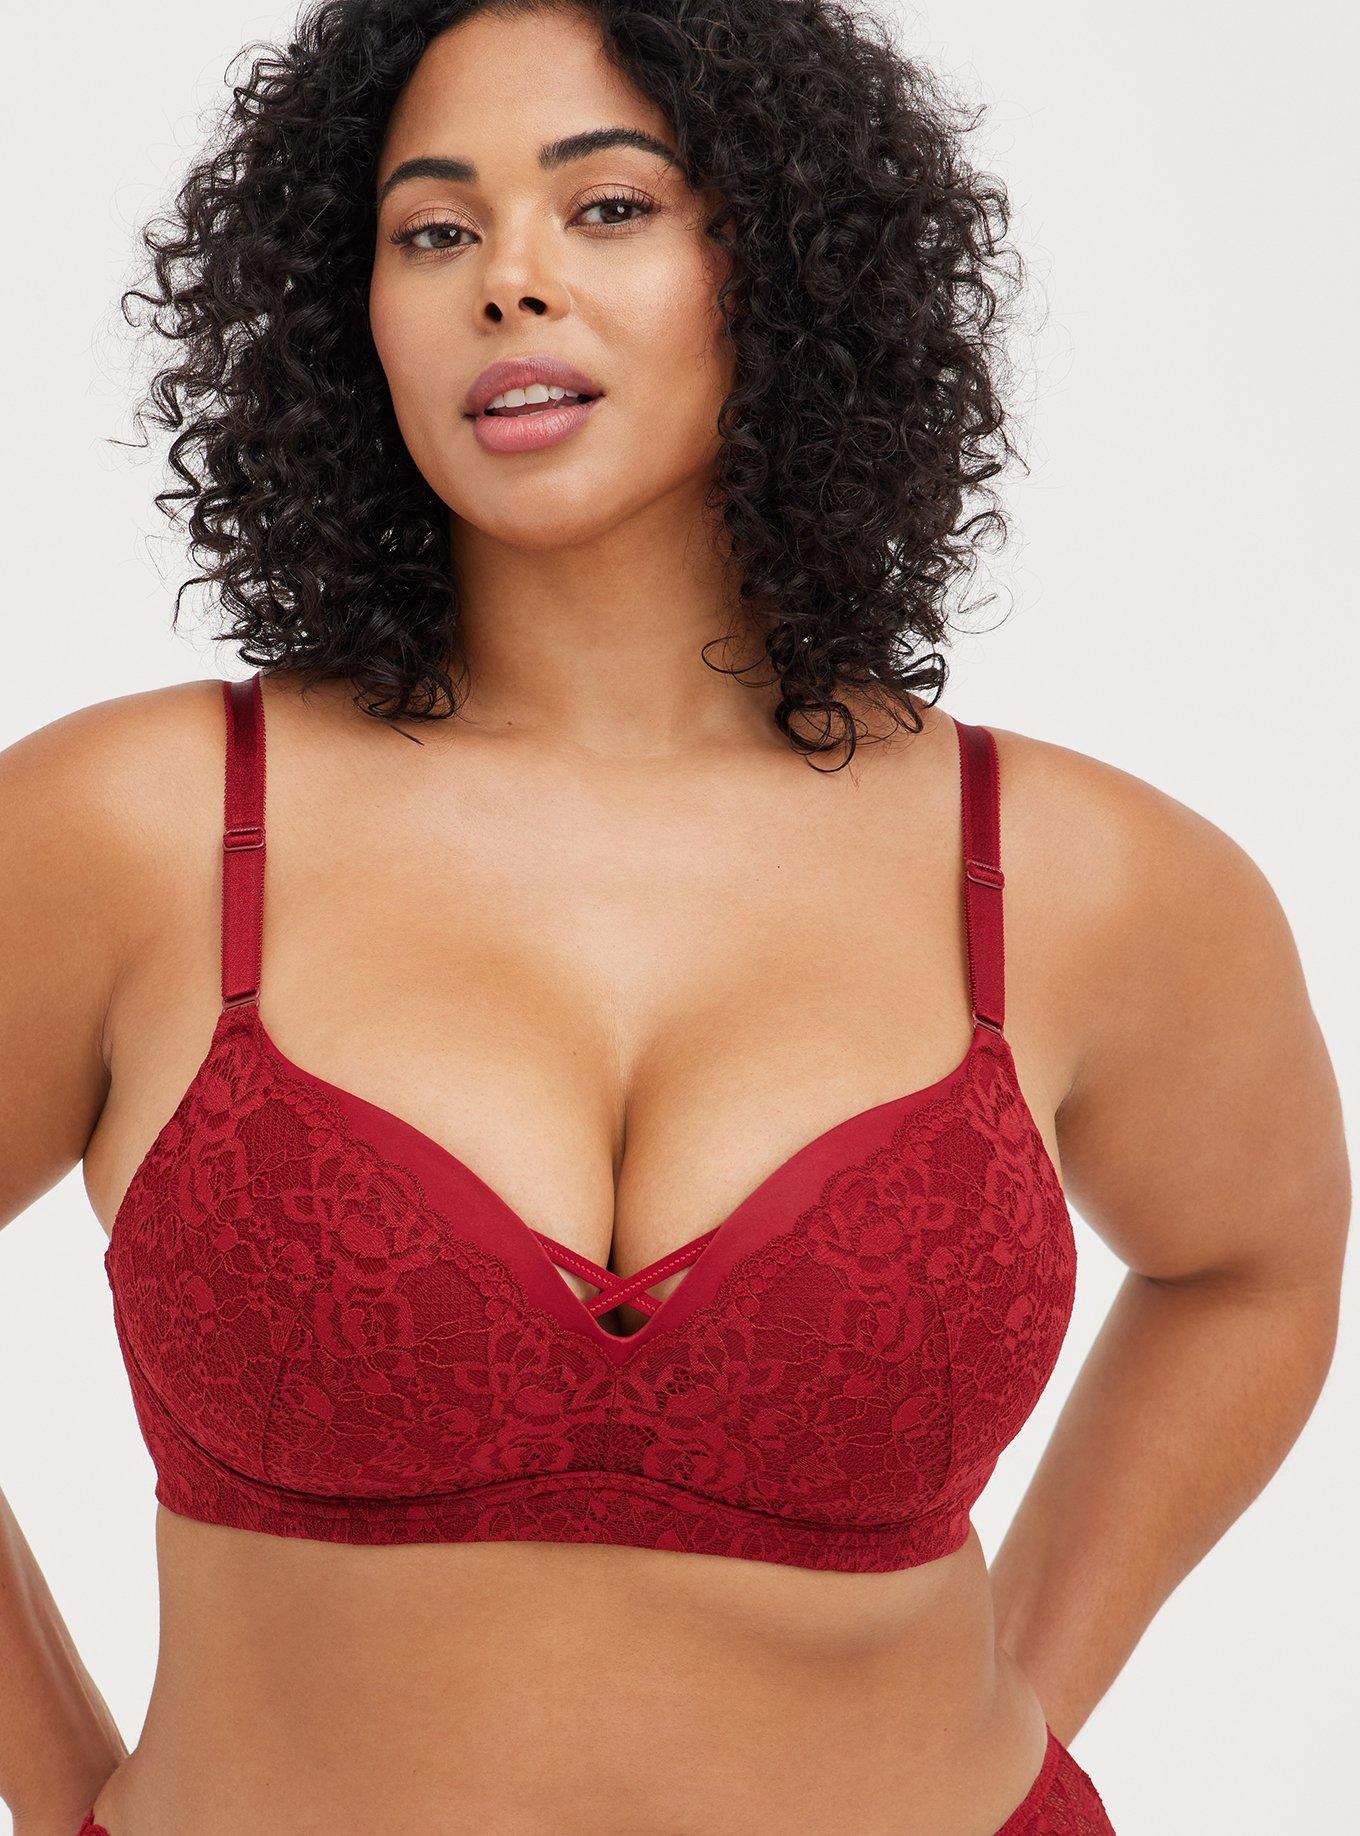 TORRID Sizes 40C, 44DD, 48D - Wire-Free Push-Up 360° Back Smoothing Bra NEW